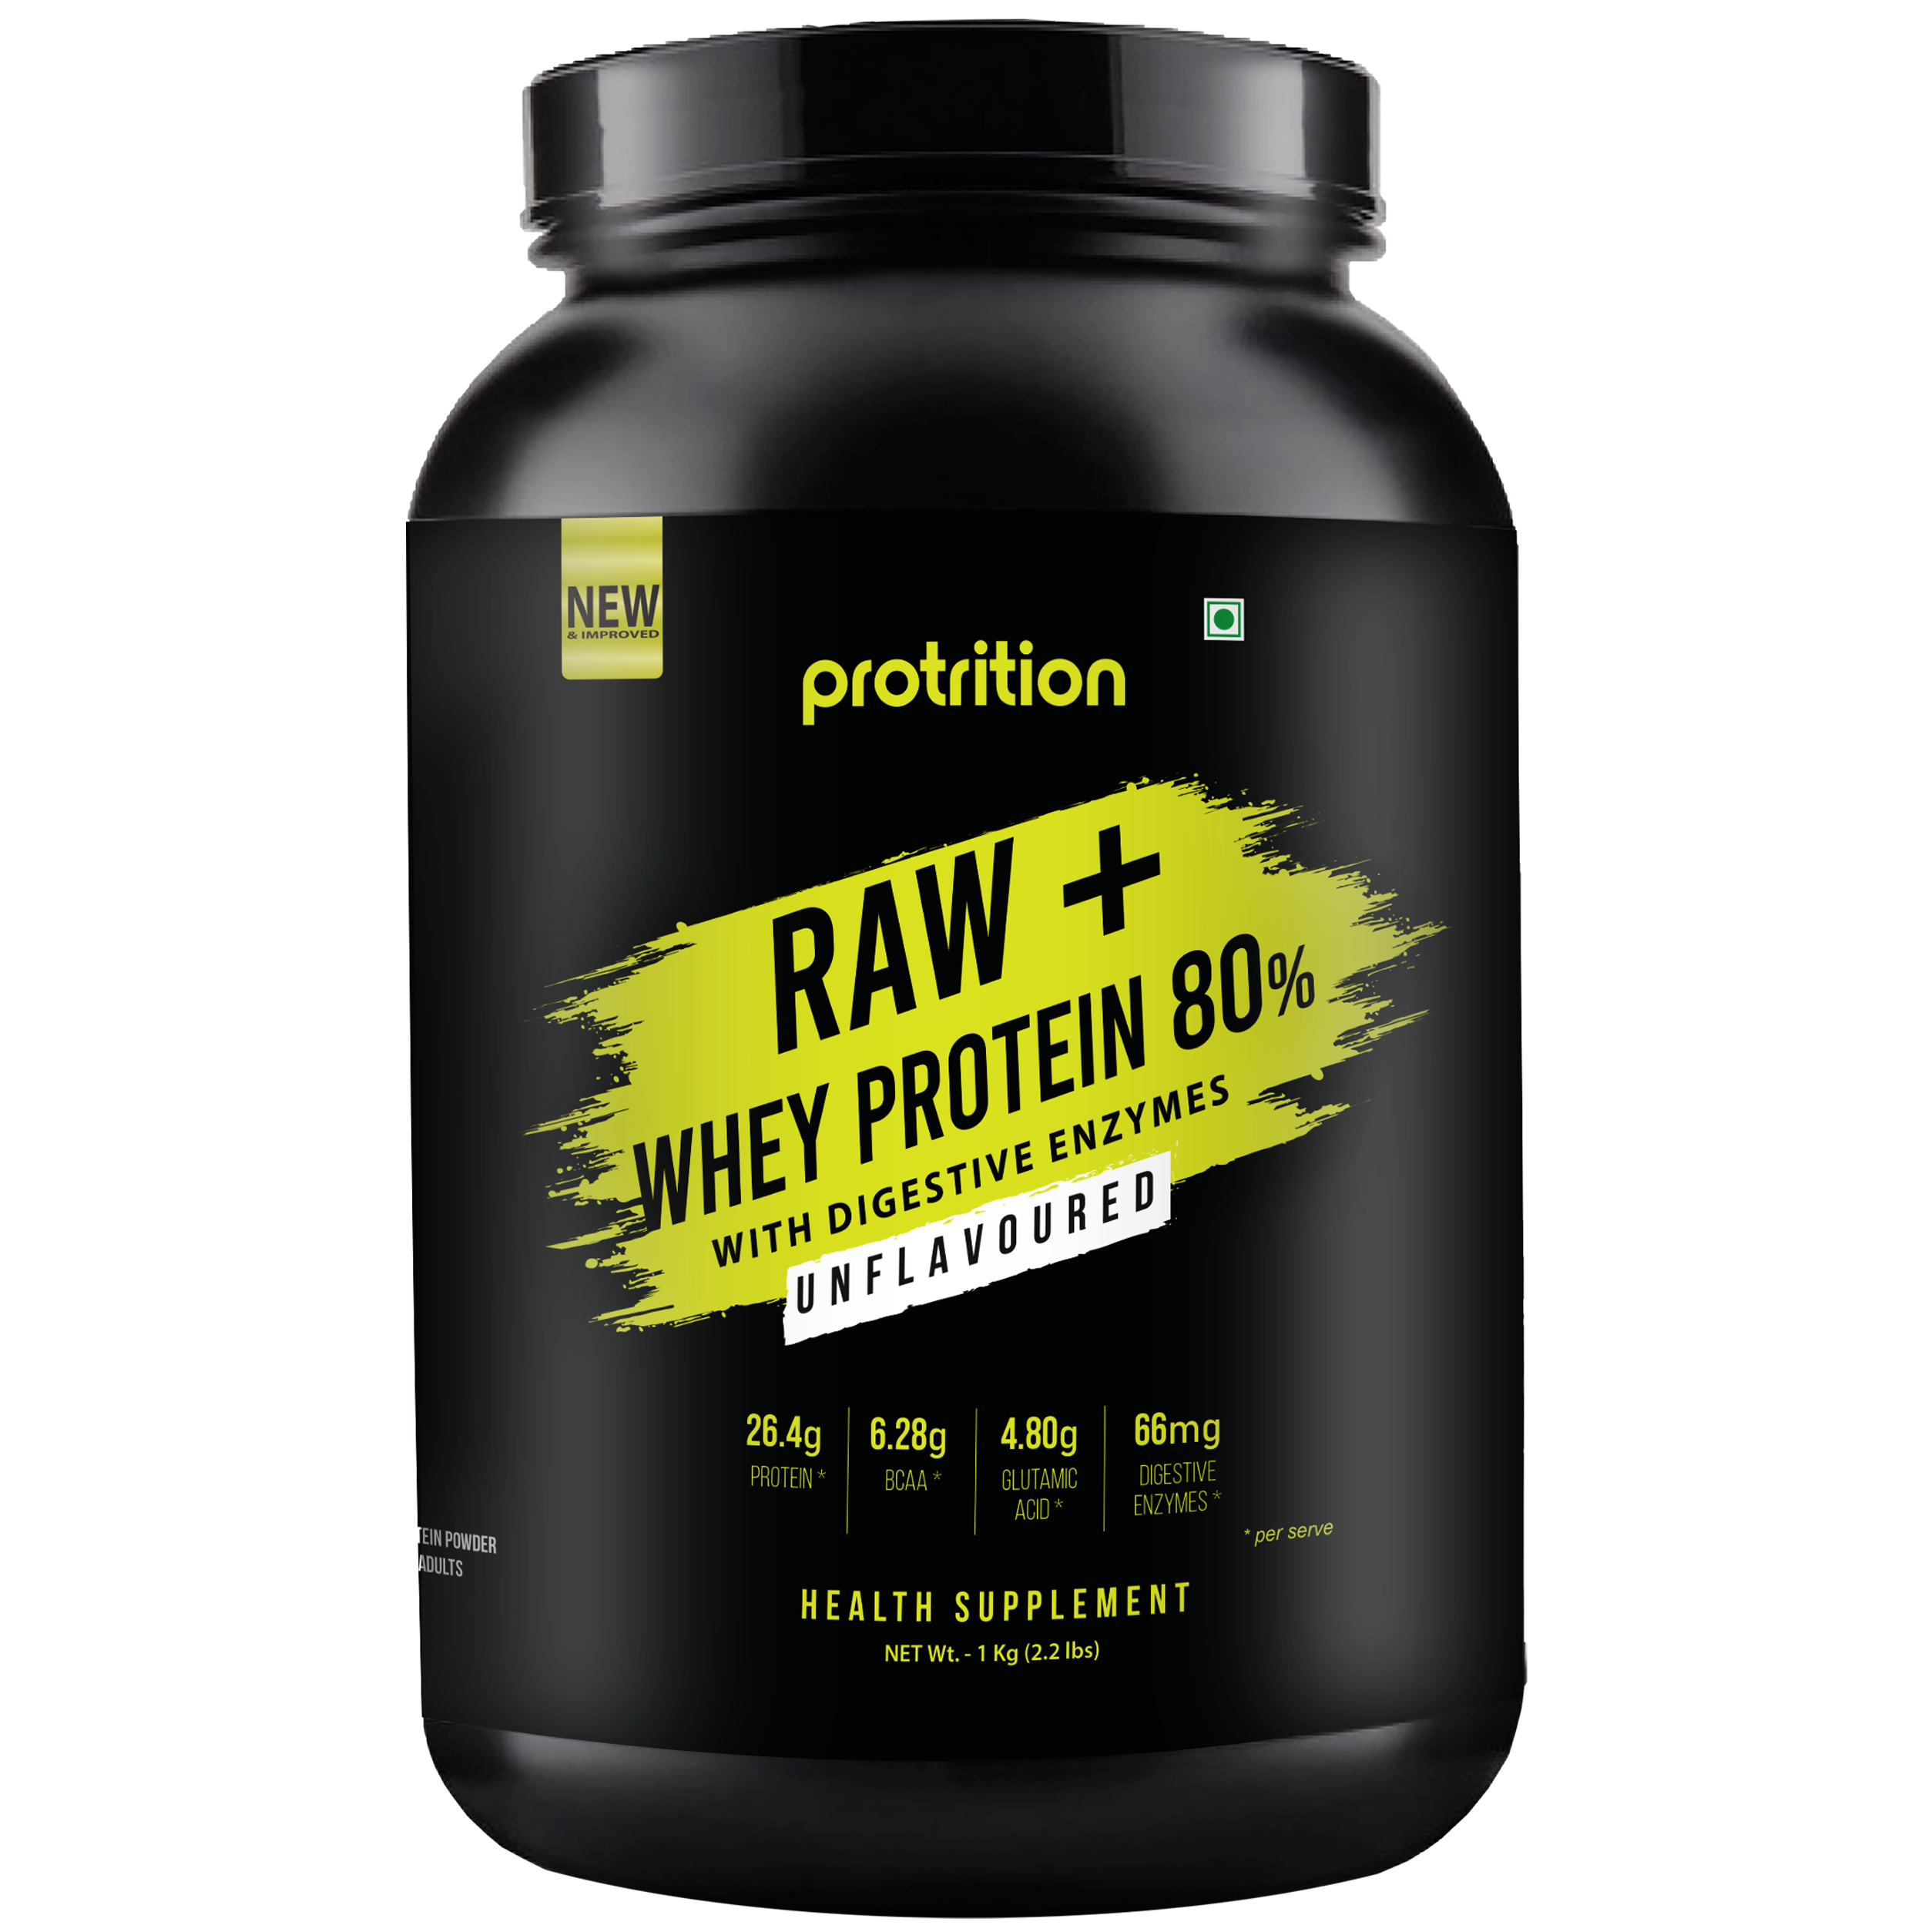 Protrition Raw+Whey Protein 80%, Unflavoured, 1Kg